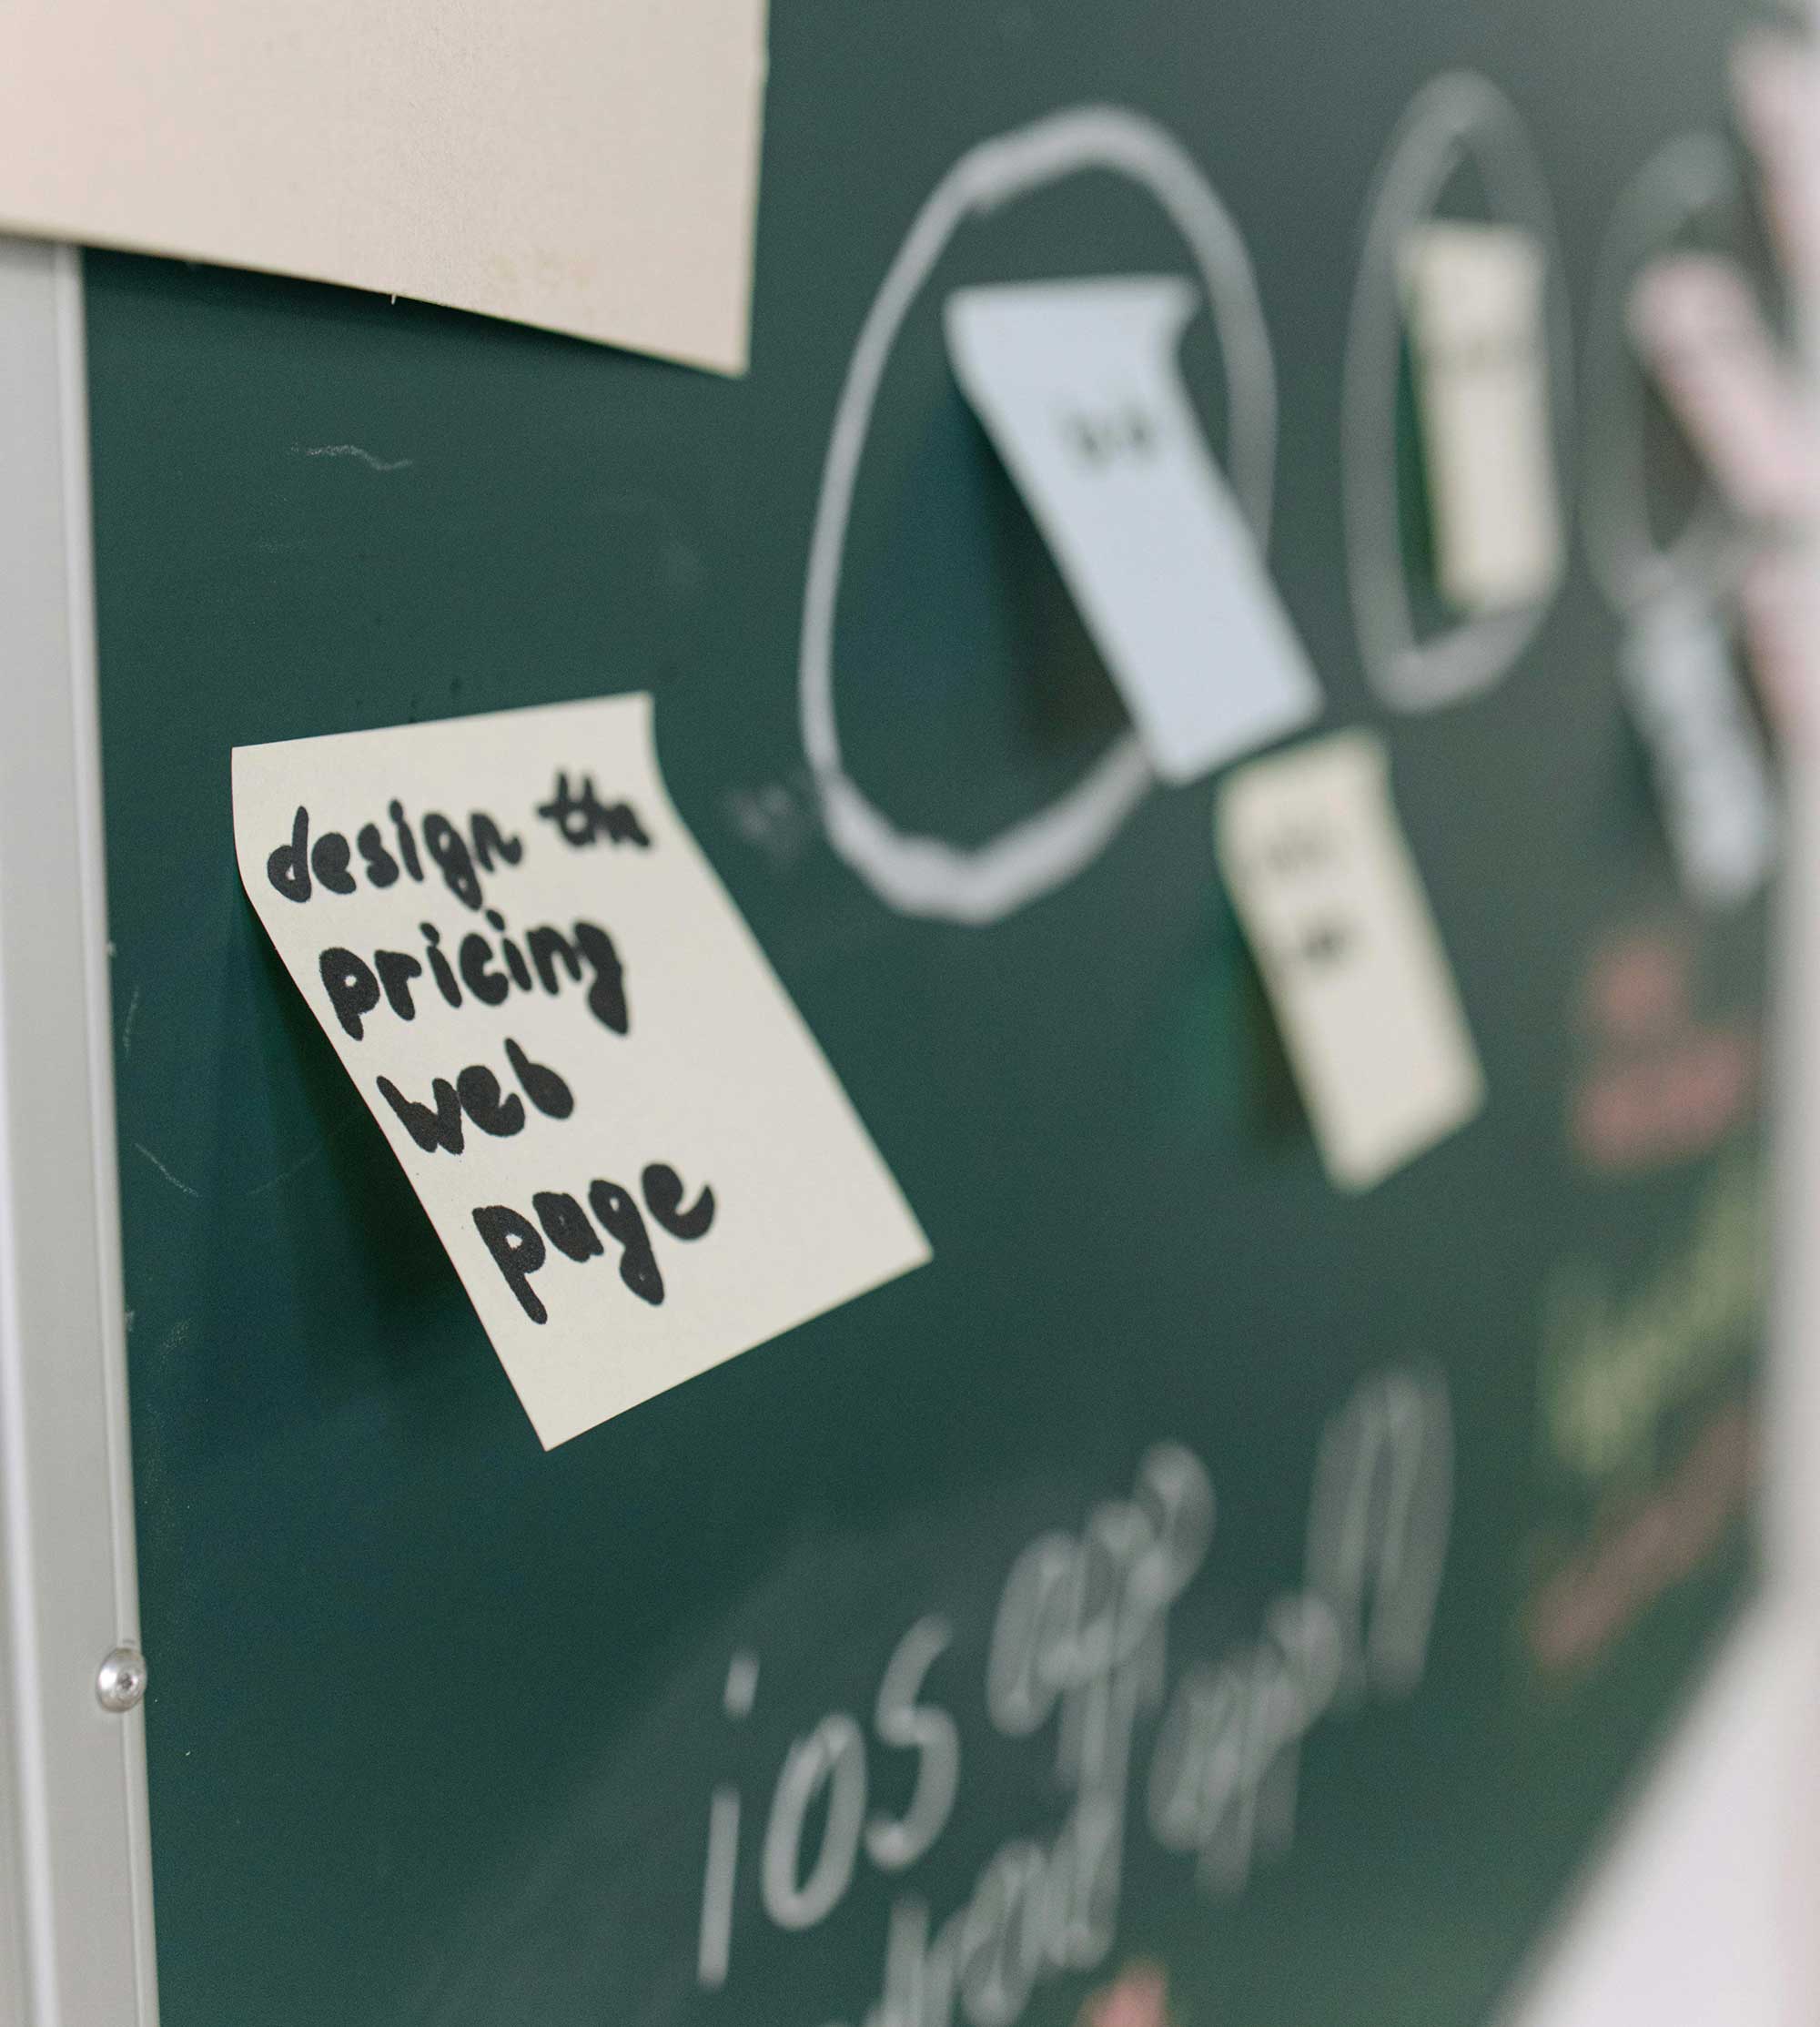 a post0it note with "design the pricing web page" written on it.